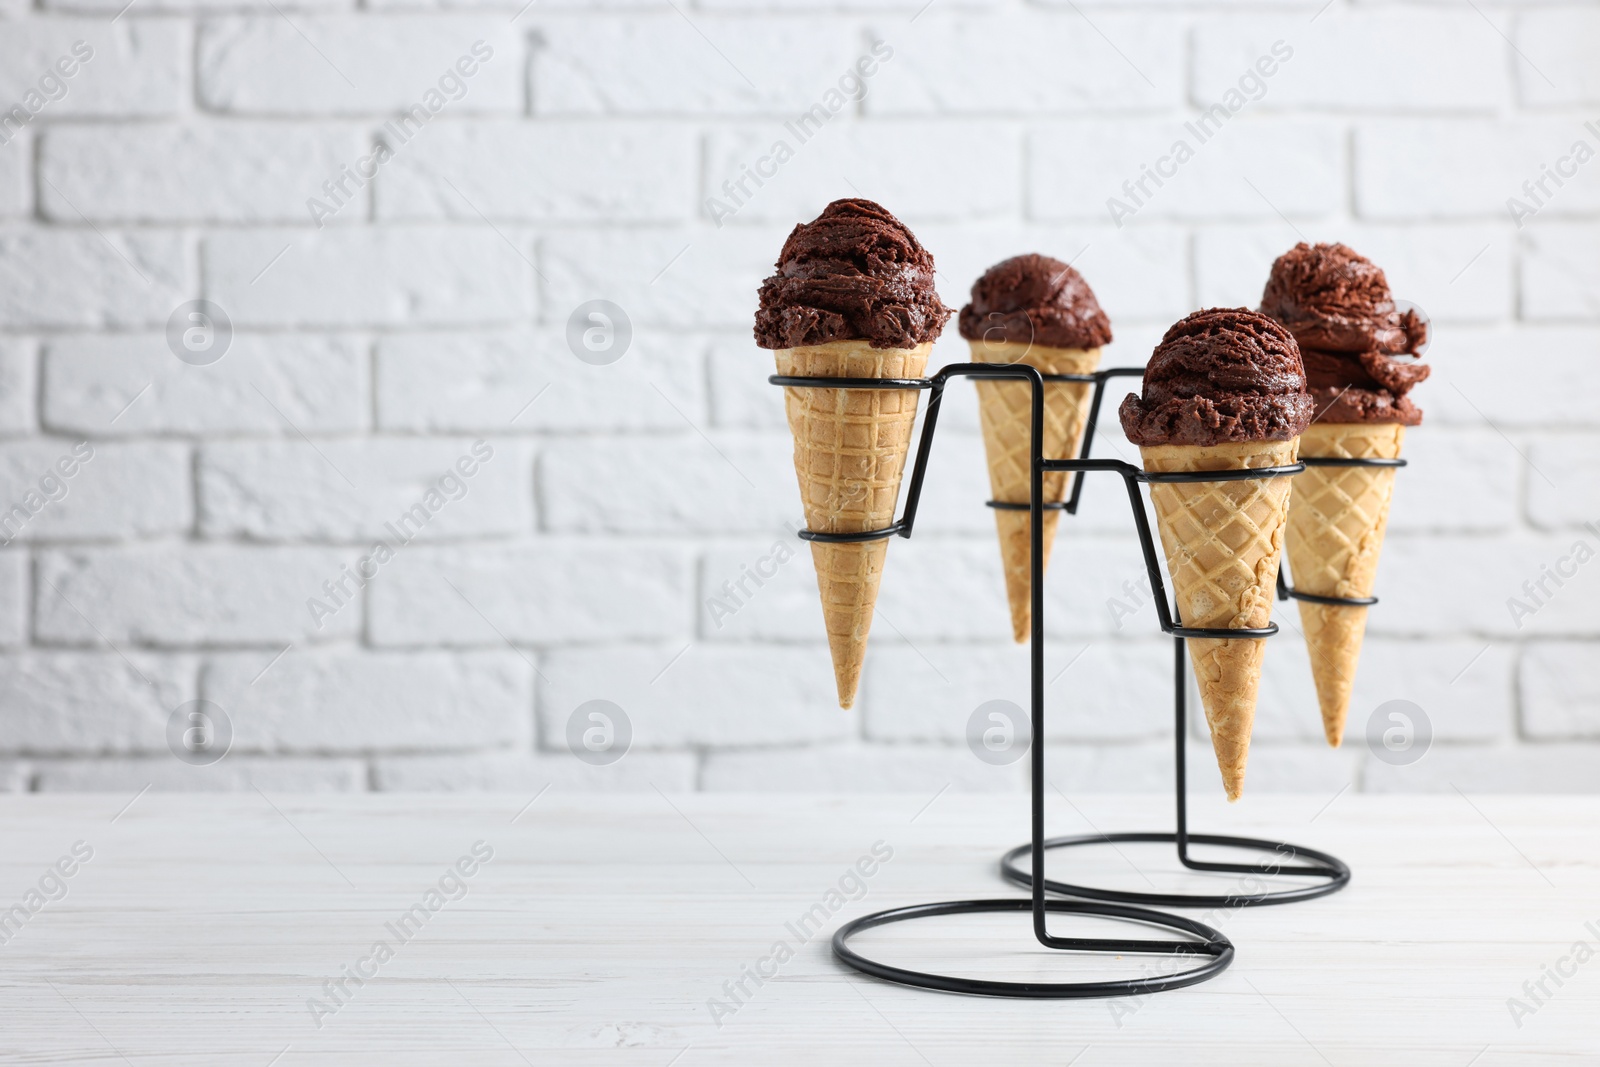 Photo of Chocolate ice cream scoops in wafer cones on white wooden table against brick wall, closeup. Space for text